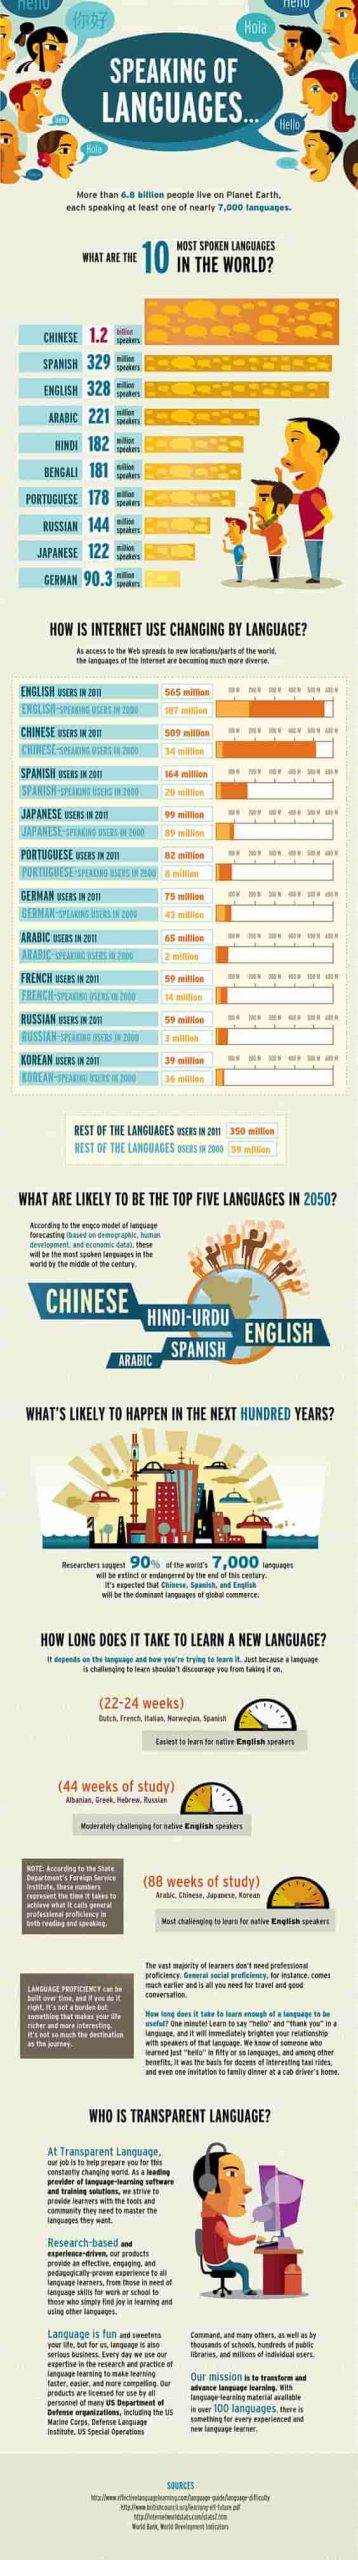 an infographic showing facts and trivia about languages